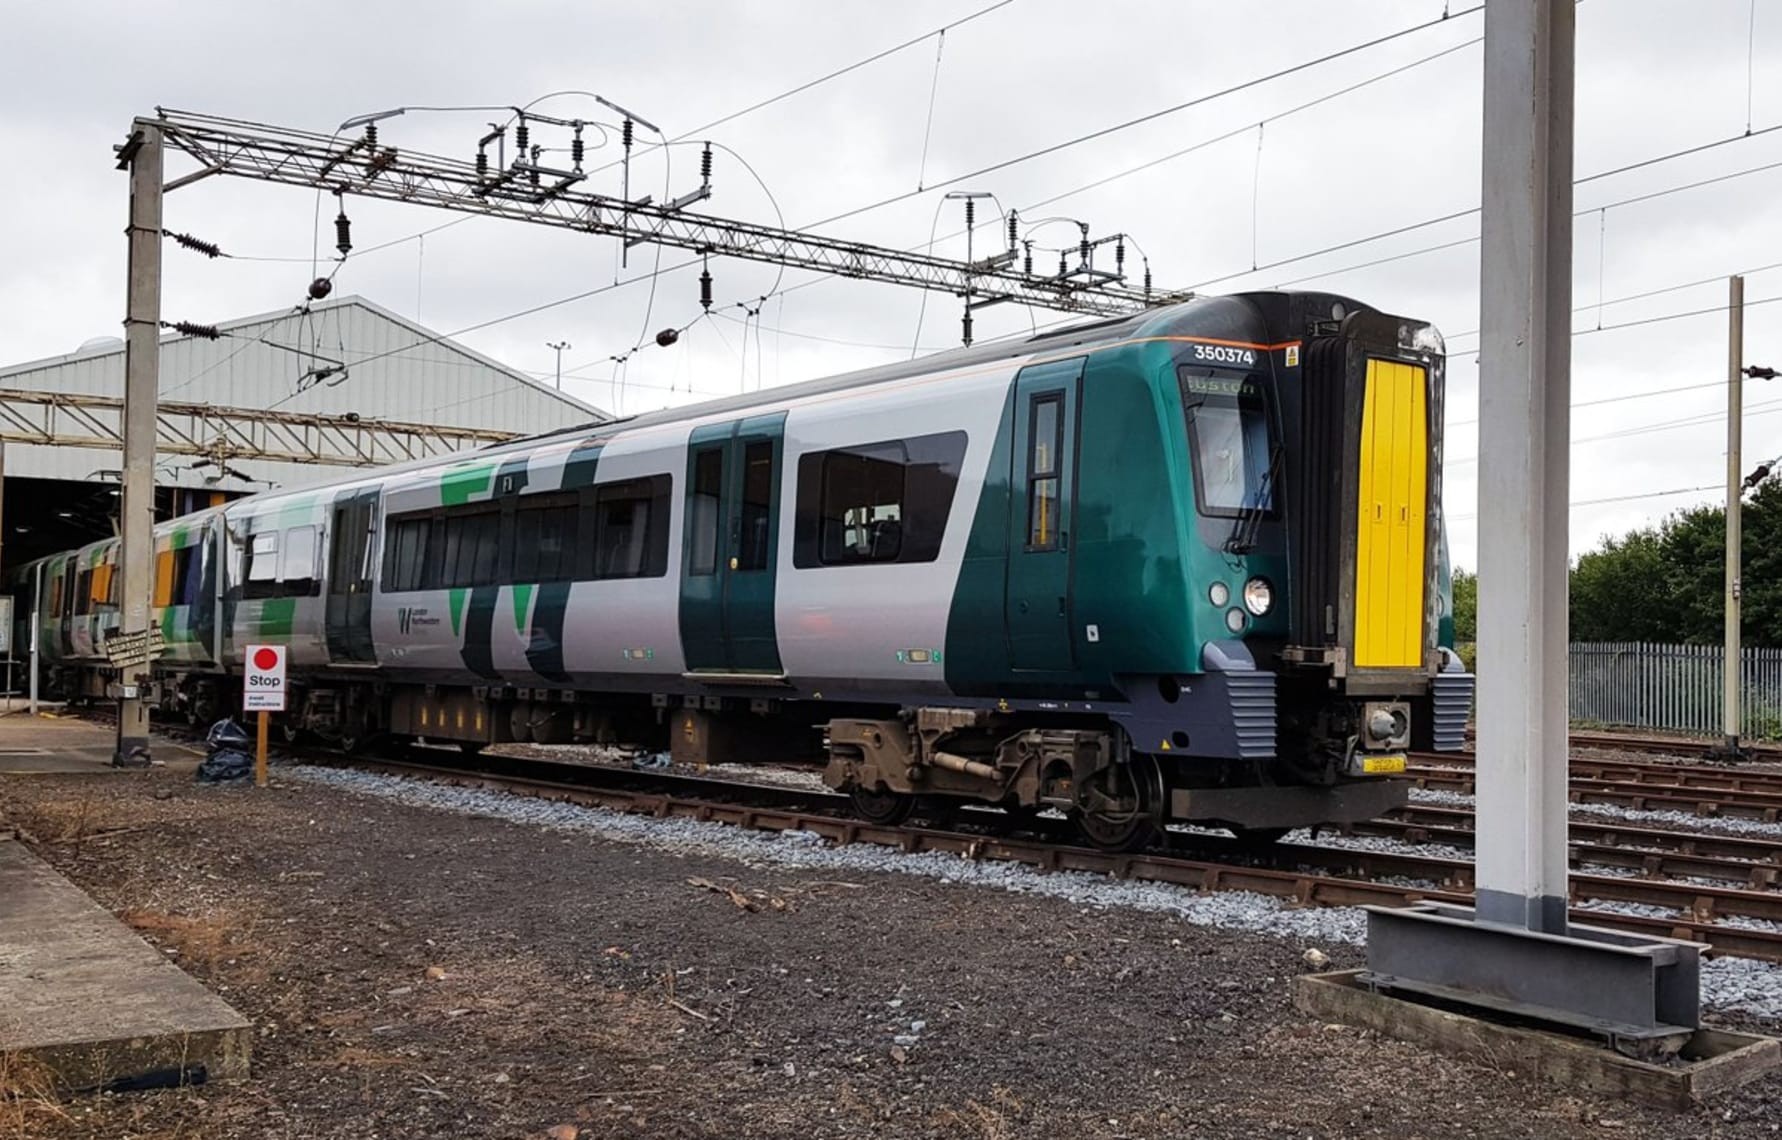 London Northwestern operates most reliable electric trains